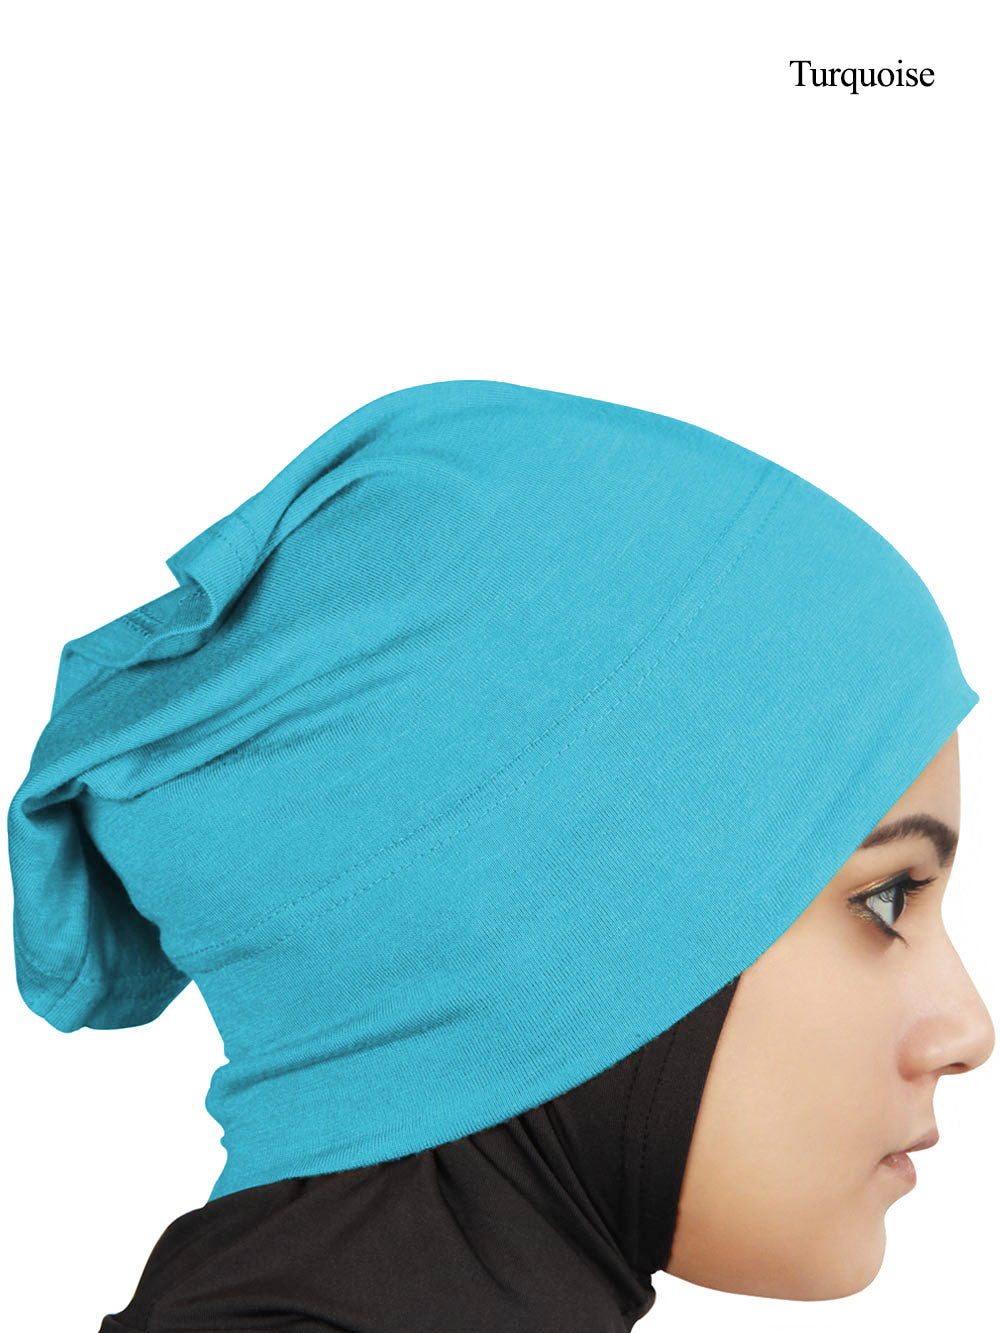 Two Piece Instant Turquoise Viscose Jersey Hijab